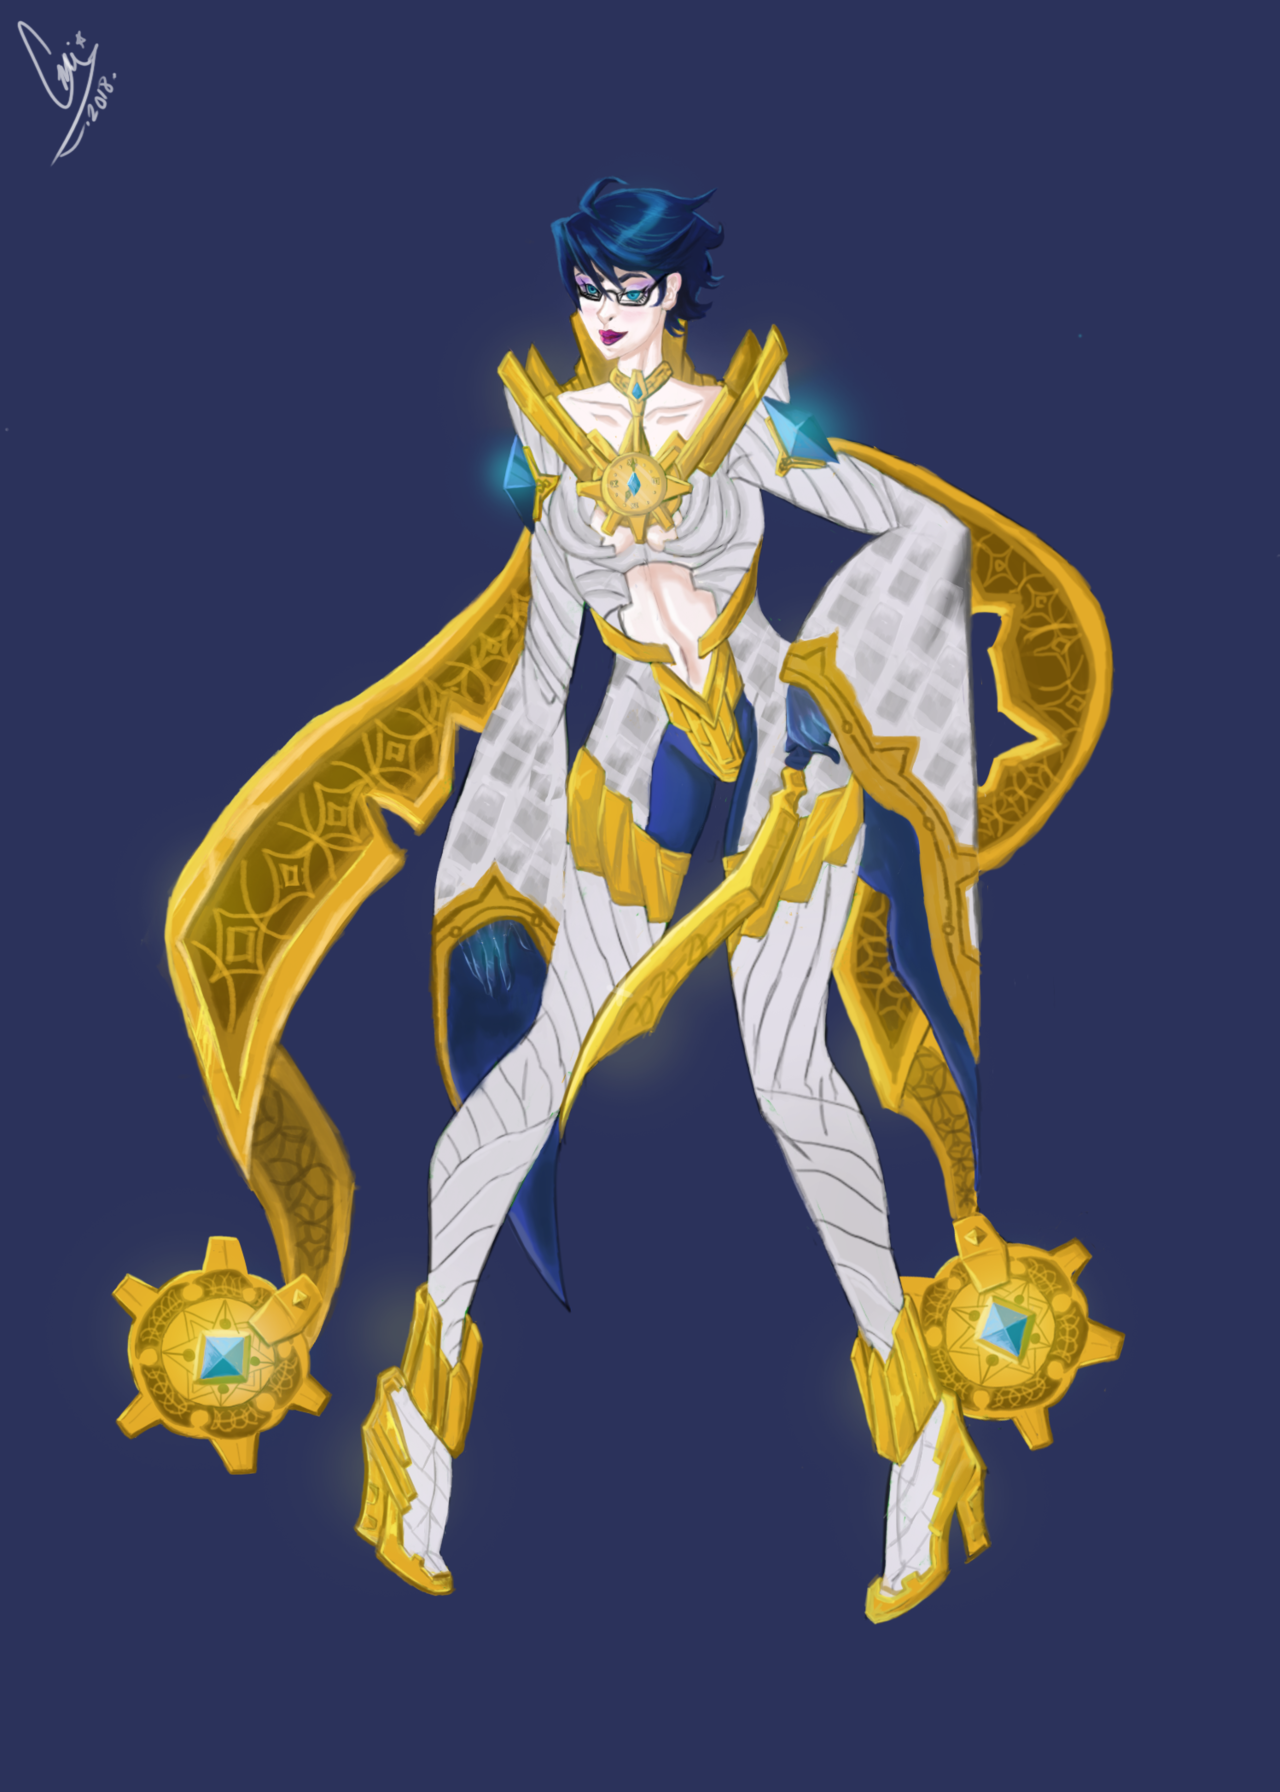 umisan-yo:Ever wondered what Bayonetta would look like if she had been raised by